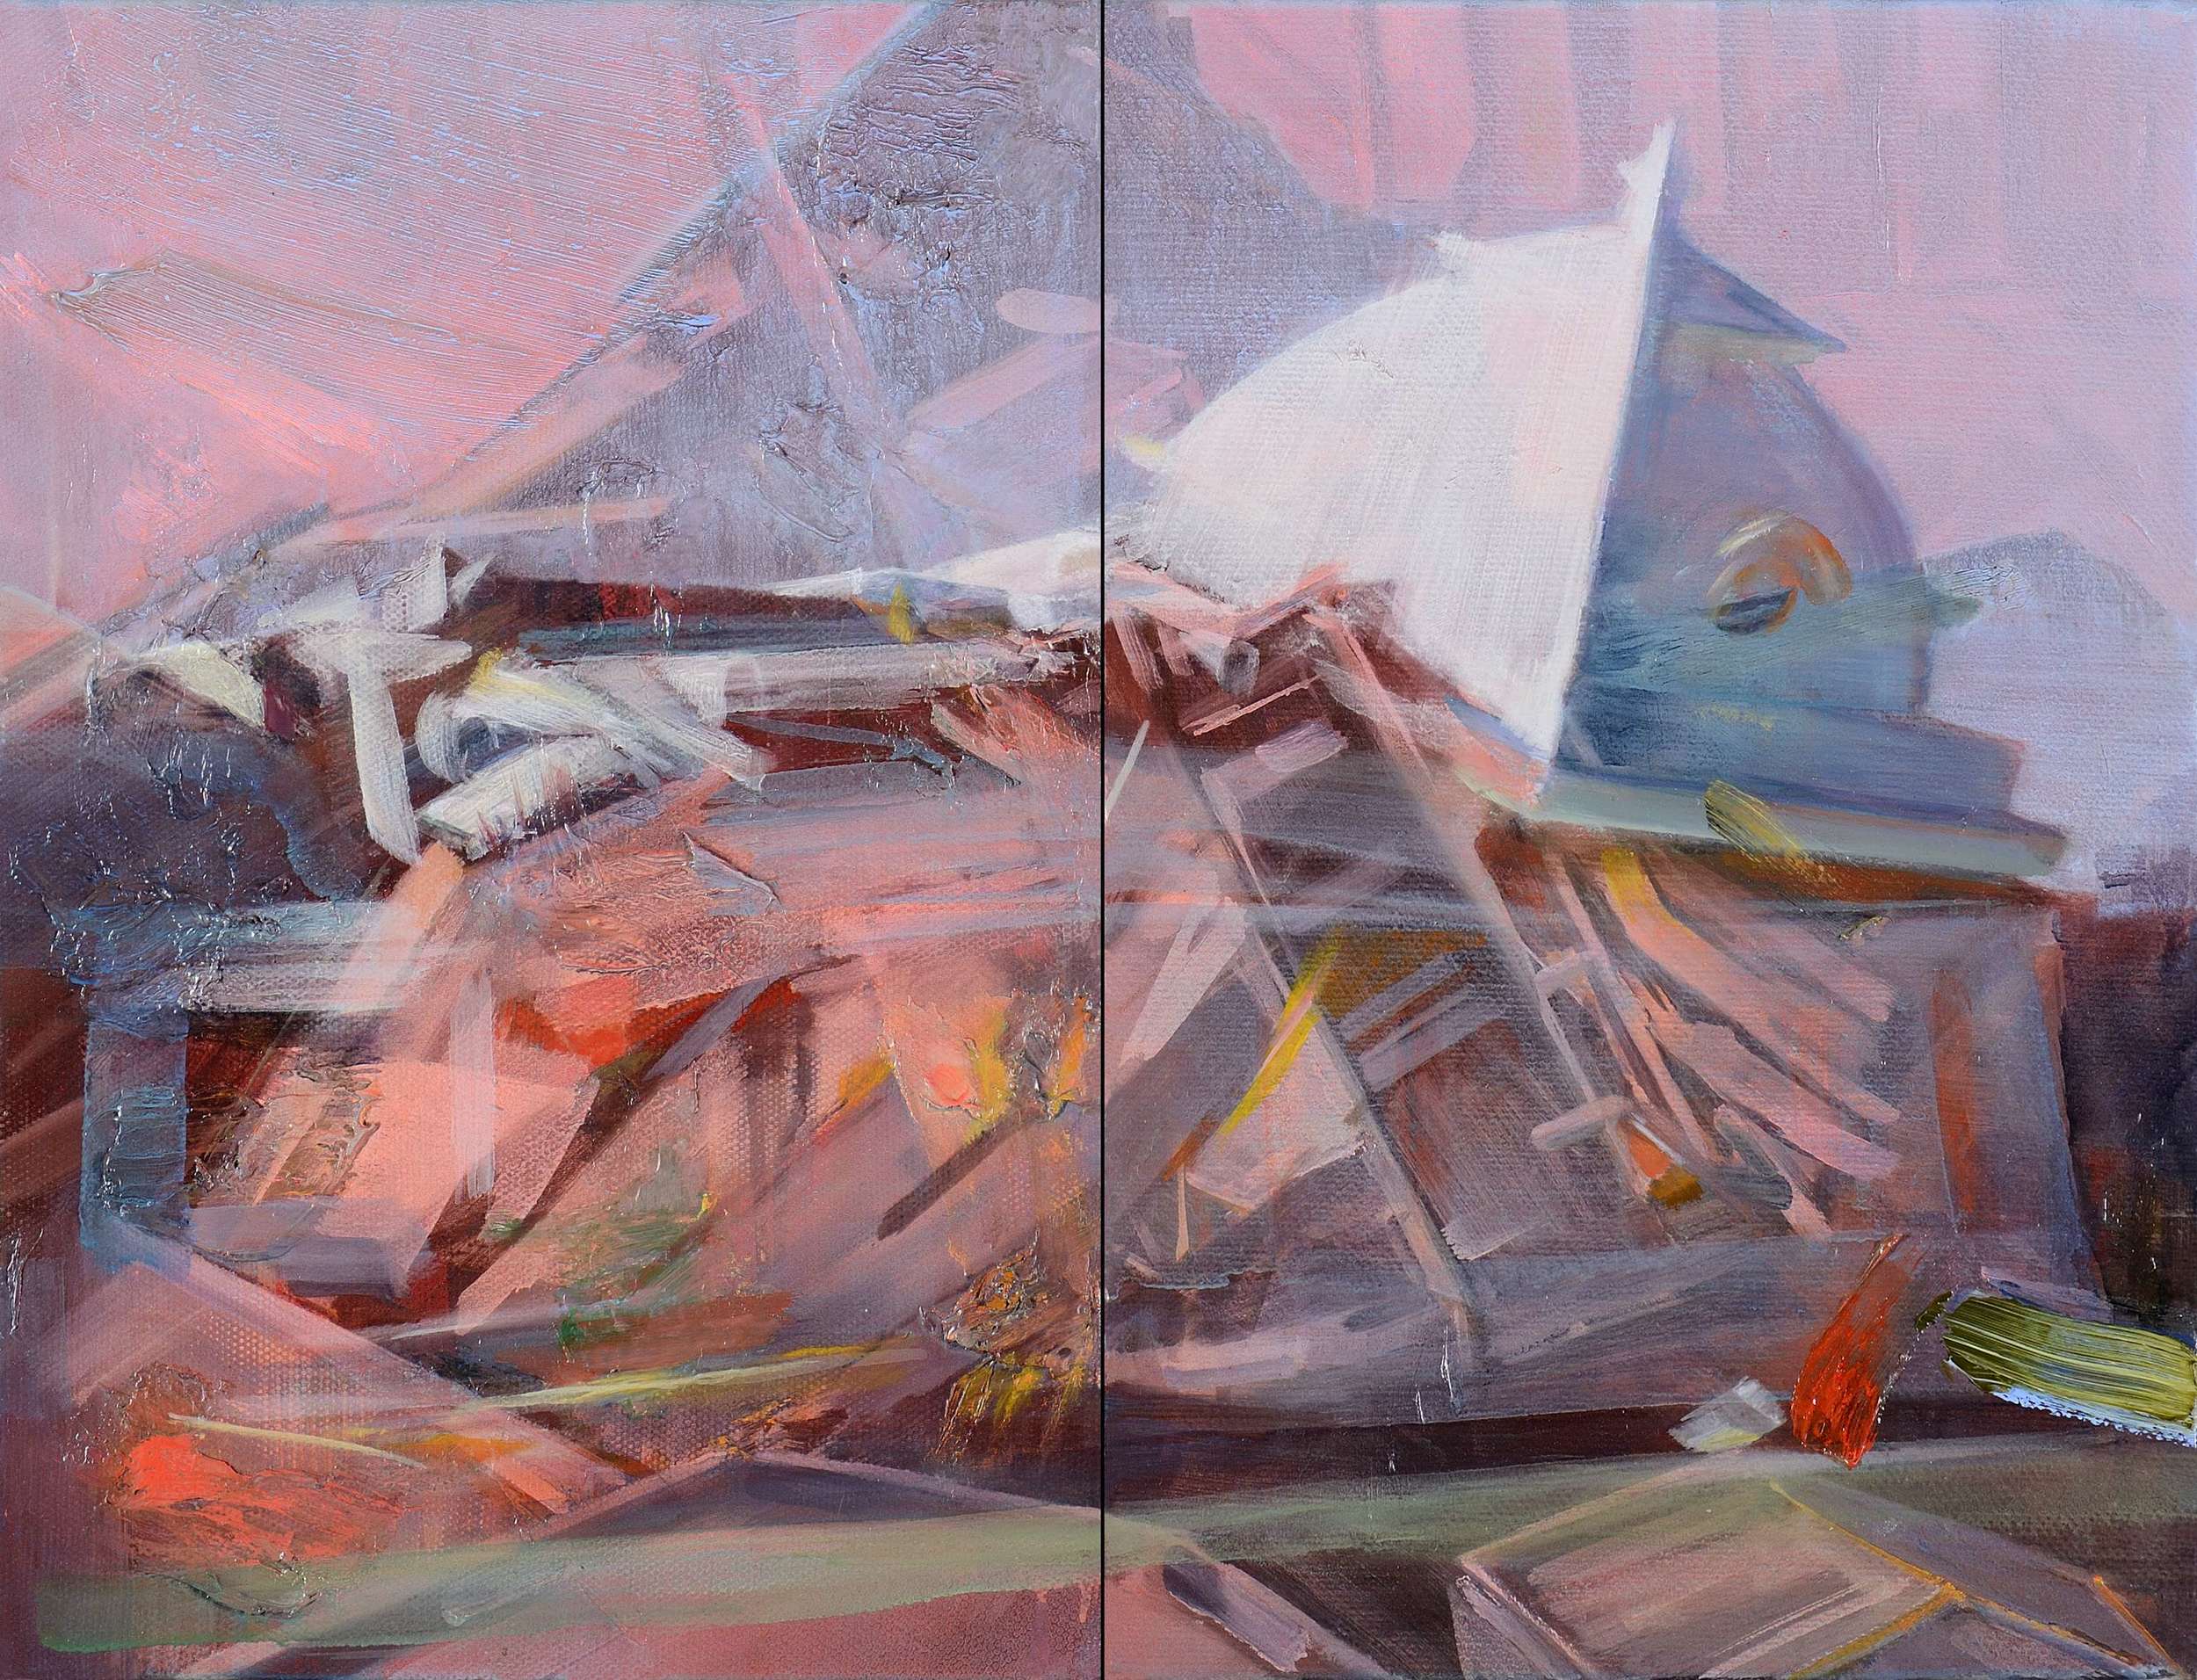   Untitled , 2012, oil and alkyd on canvas, 43 x 58cm (diptych). Private collection,&nbsp;France 